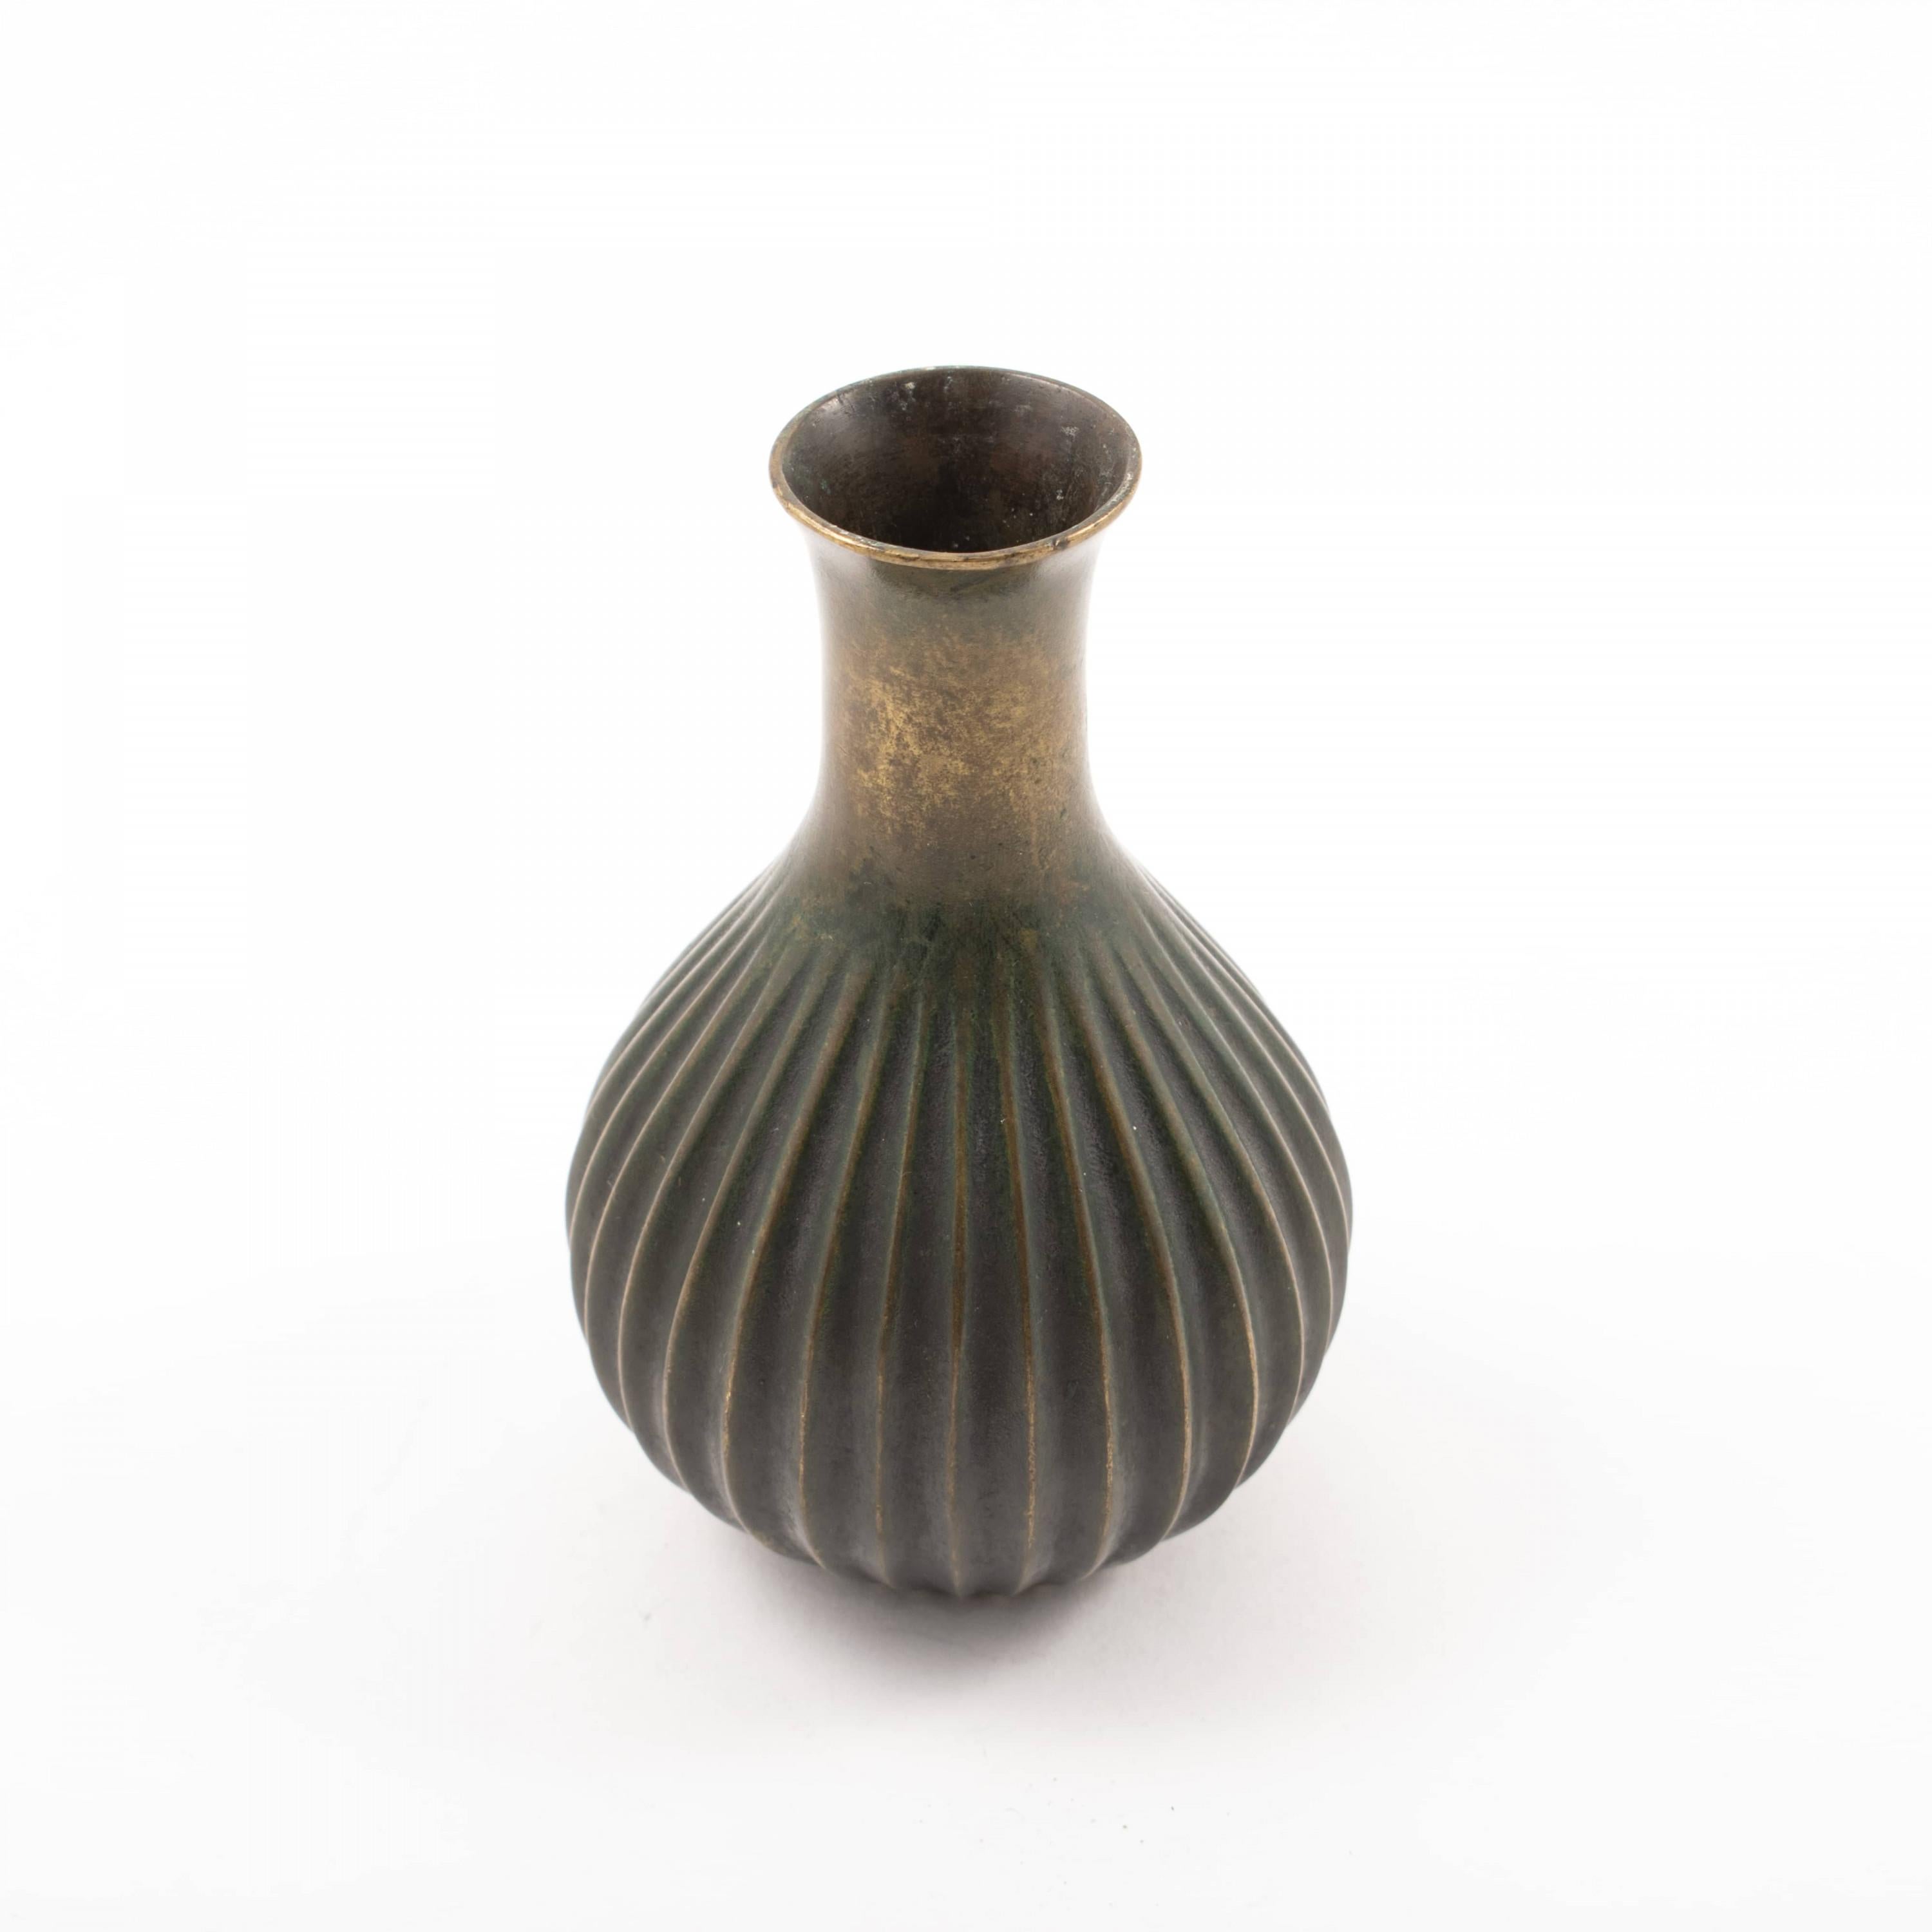 Just Andersen (1884-1943)
Small Art Deco vase in green patinated bronze. Ribbed body and smooth neck. Model number B127.
Stamped JUST,
Denmark, c. 1925-1930.
Measure: H. 12.5 cm.